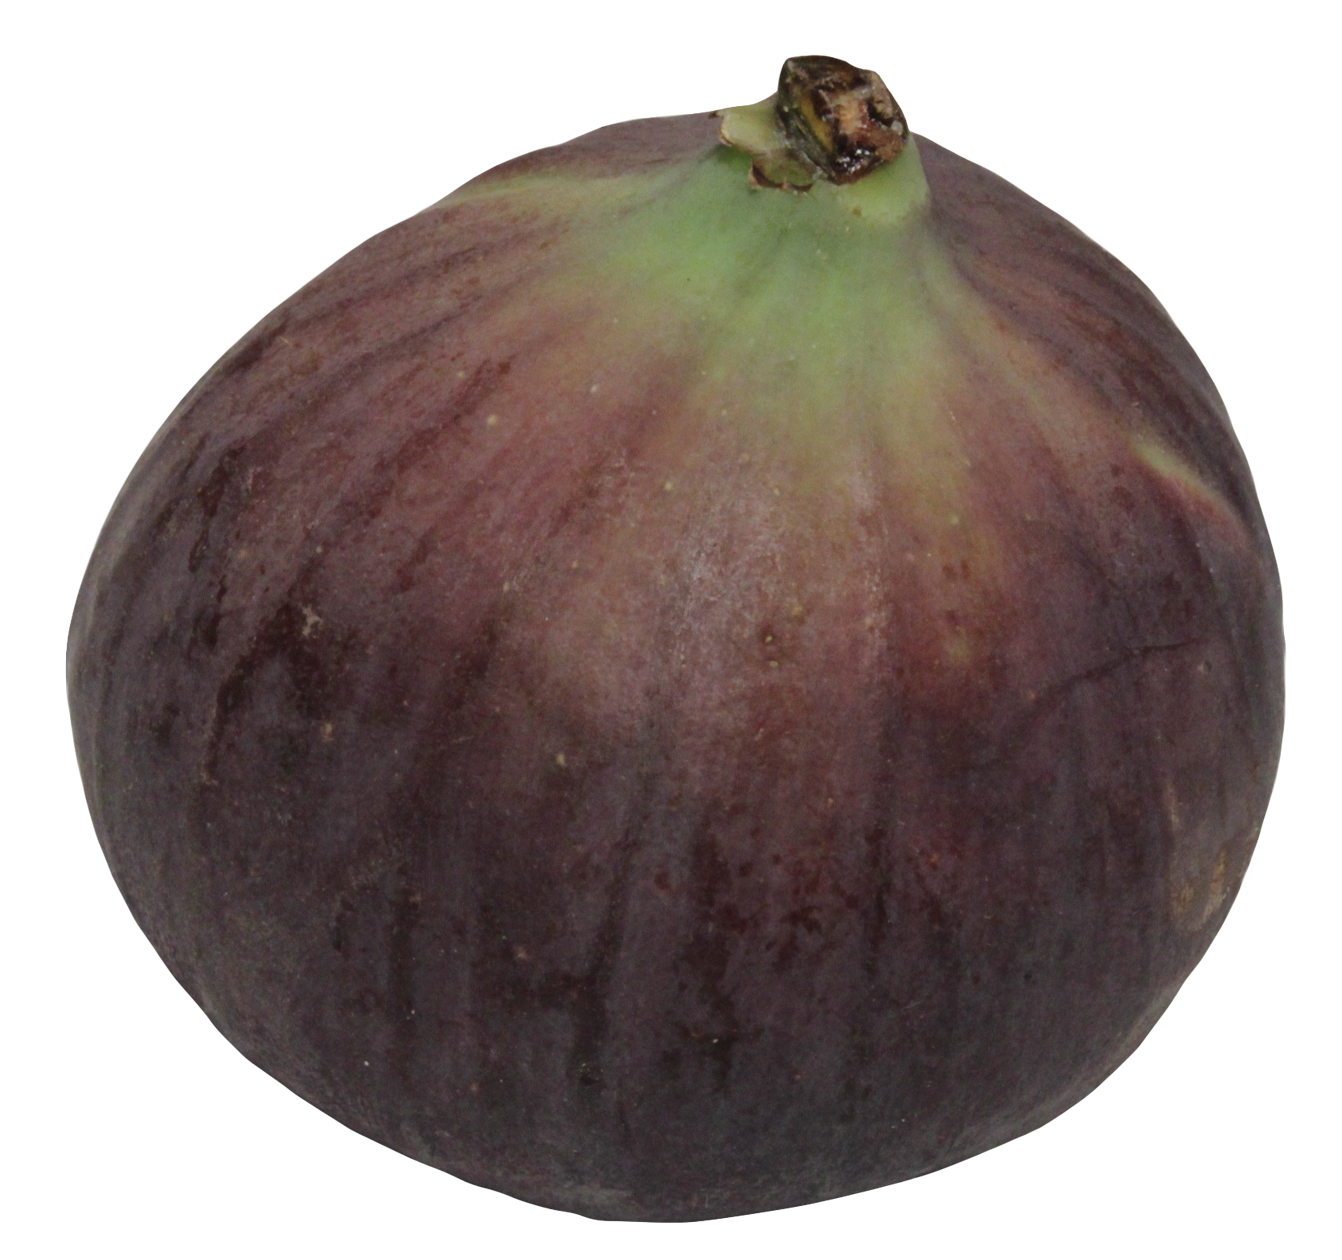 A Close Up Of A Fig